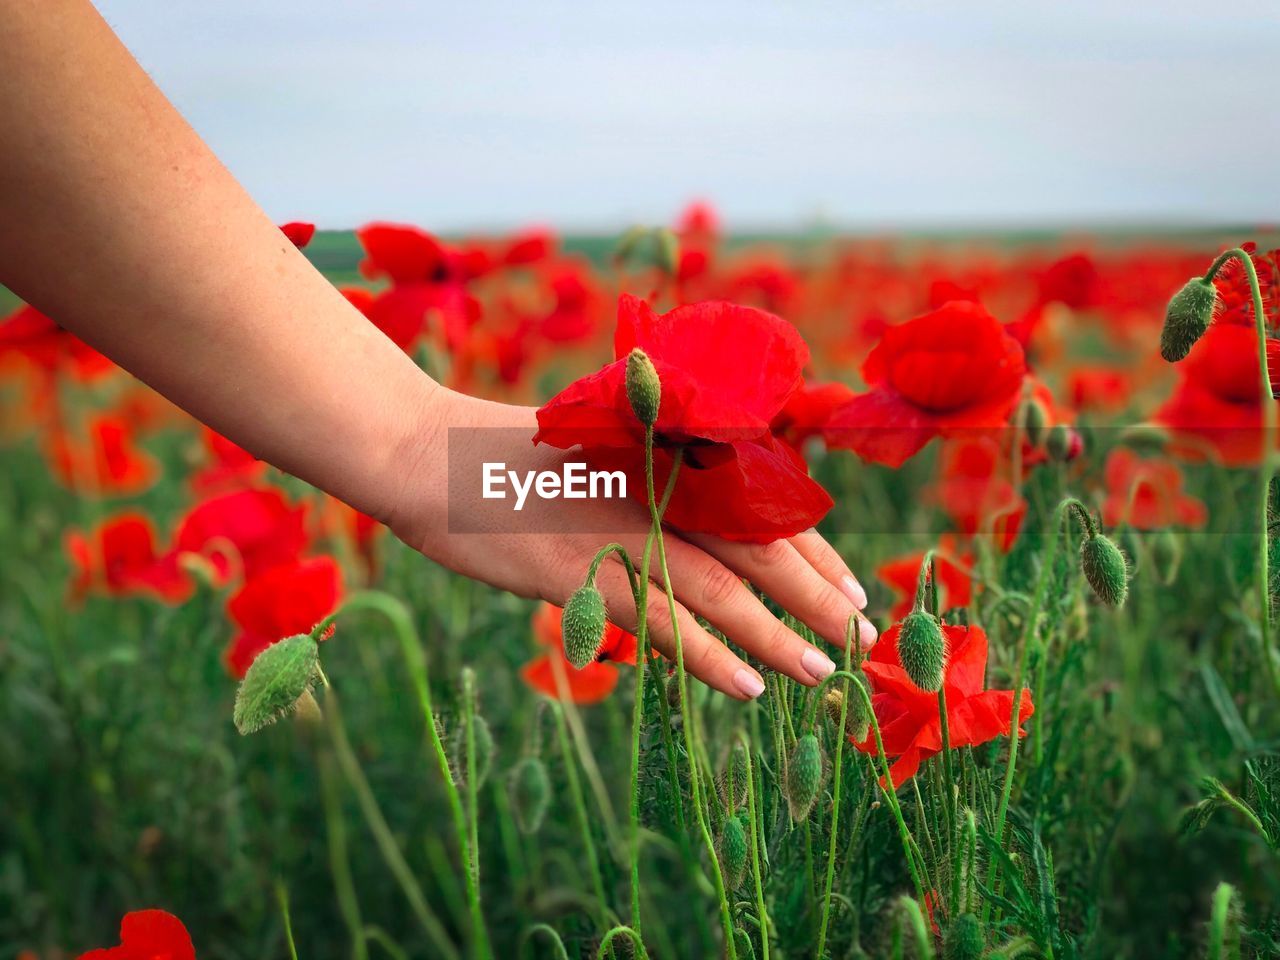 Woman s hand touching the poppies blooming in a field